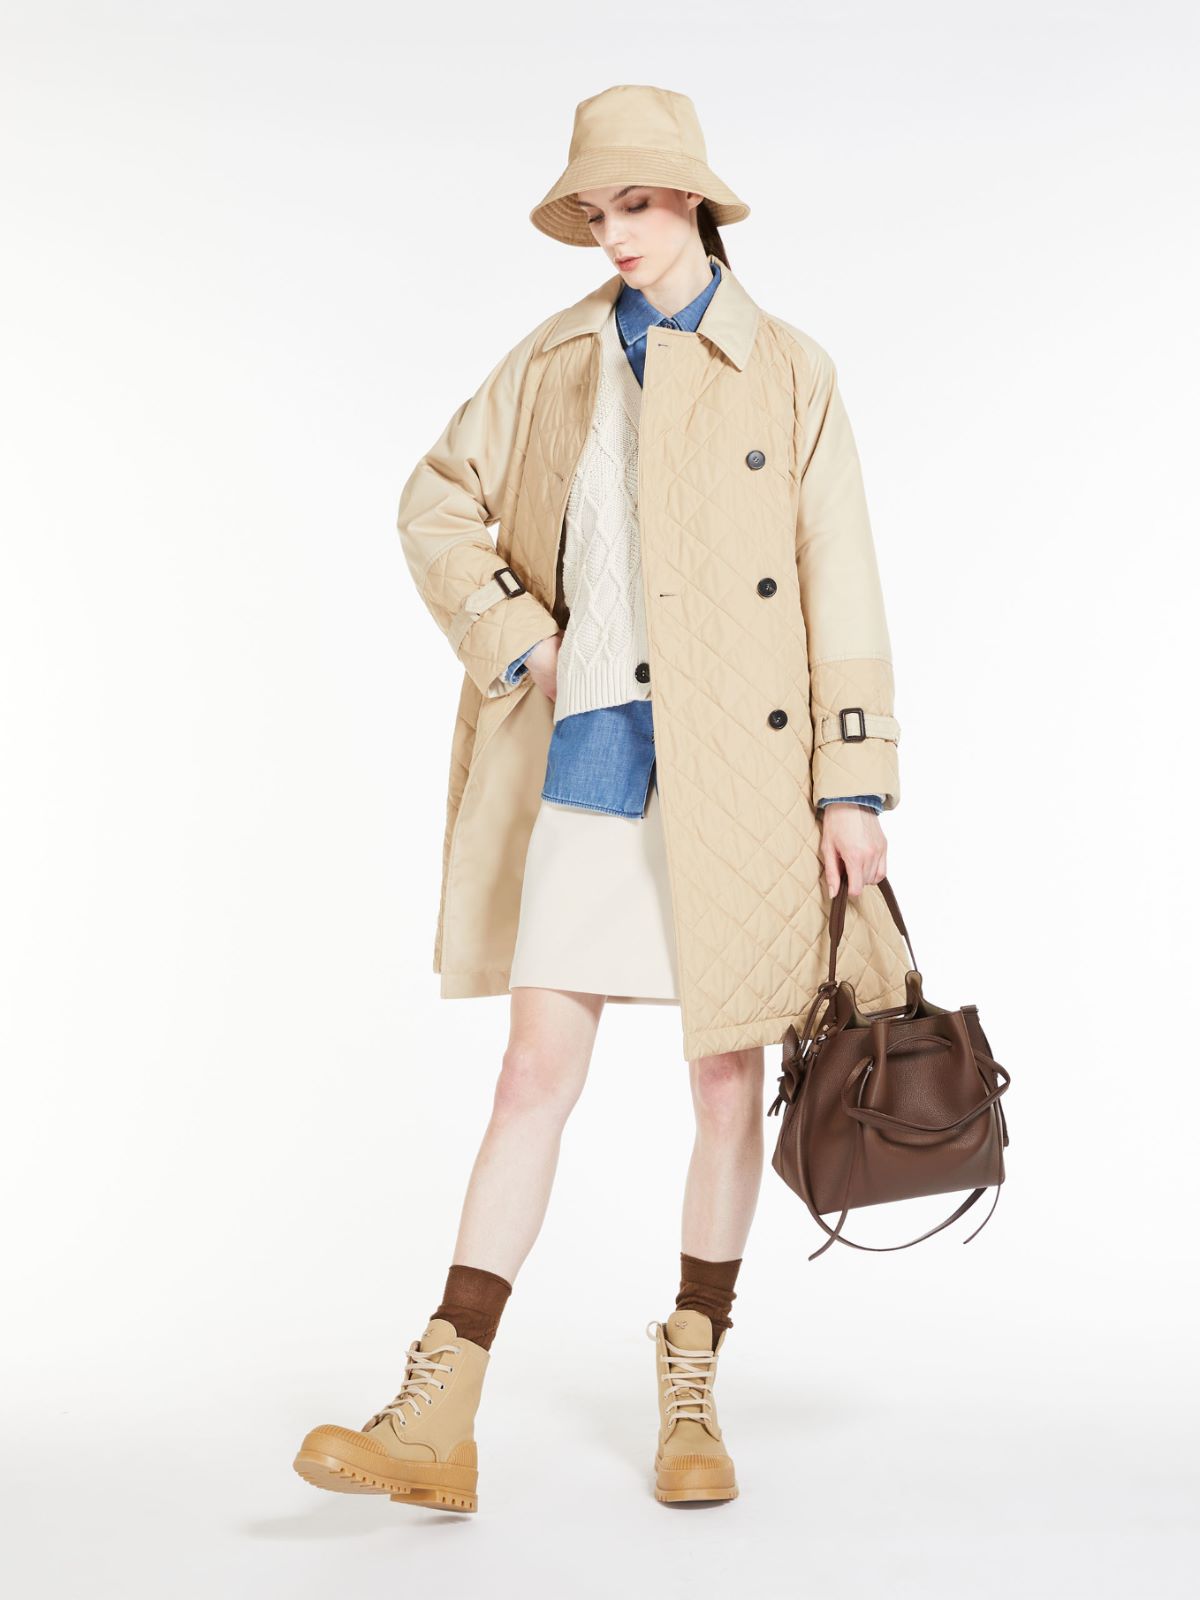 Quilted trench coat - BEIGE - Weekend Max Mara